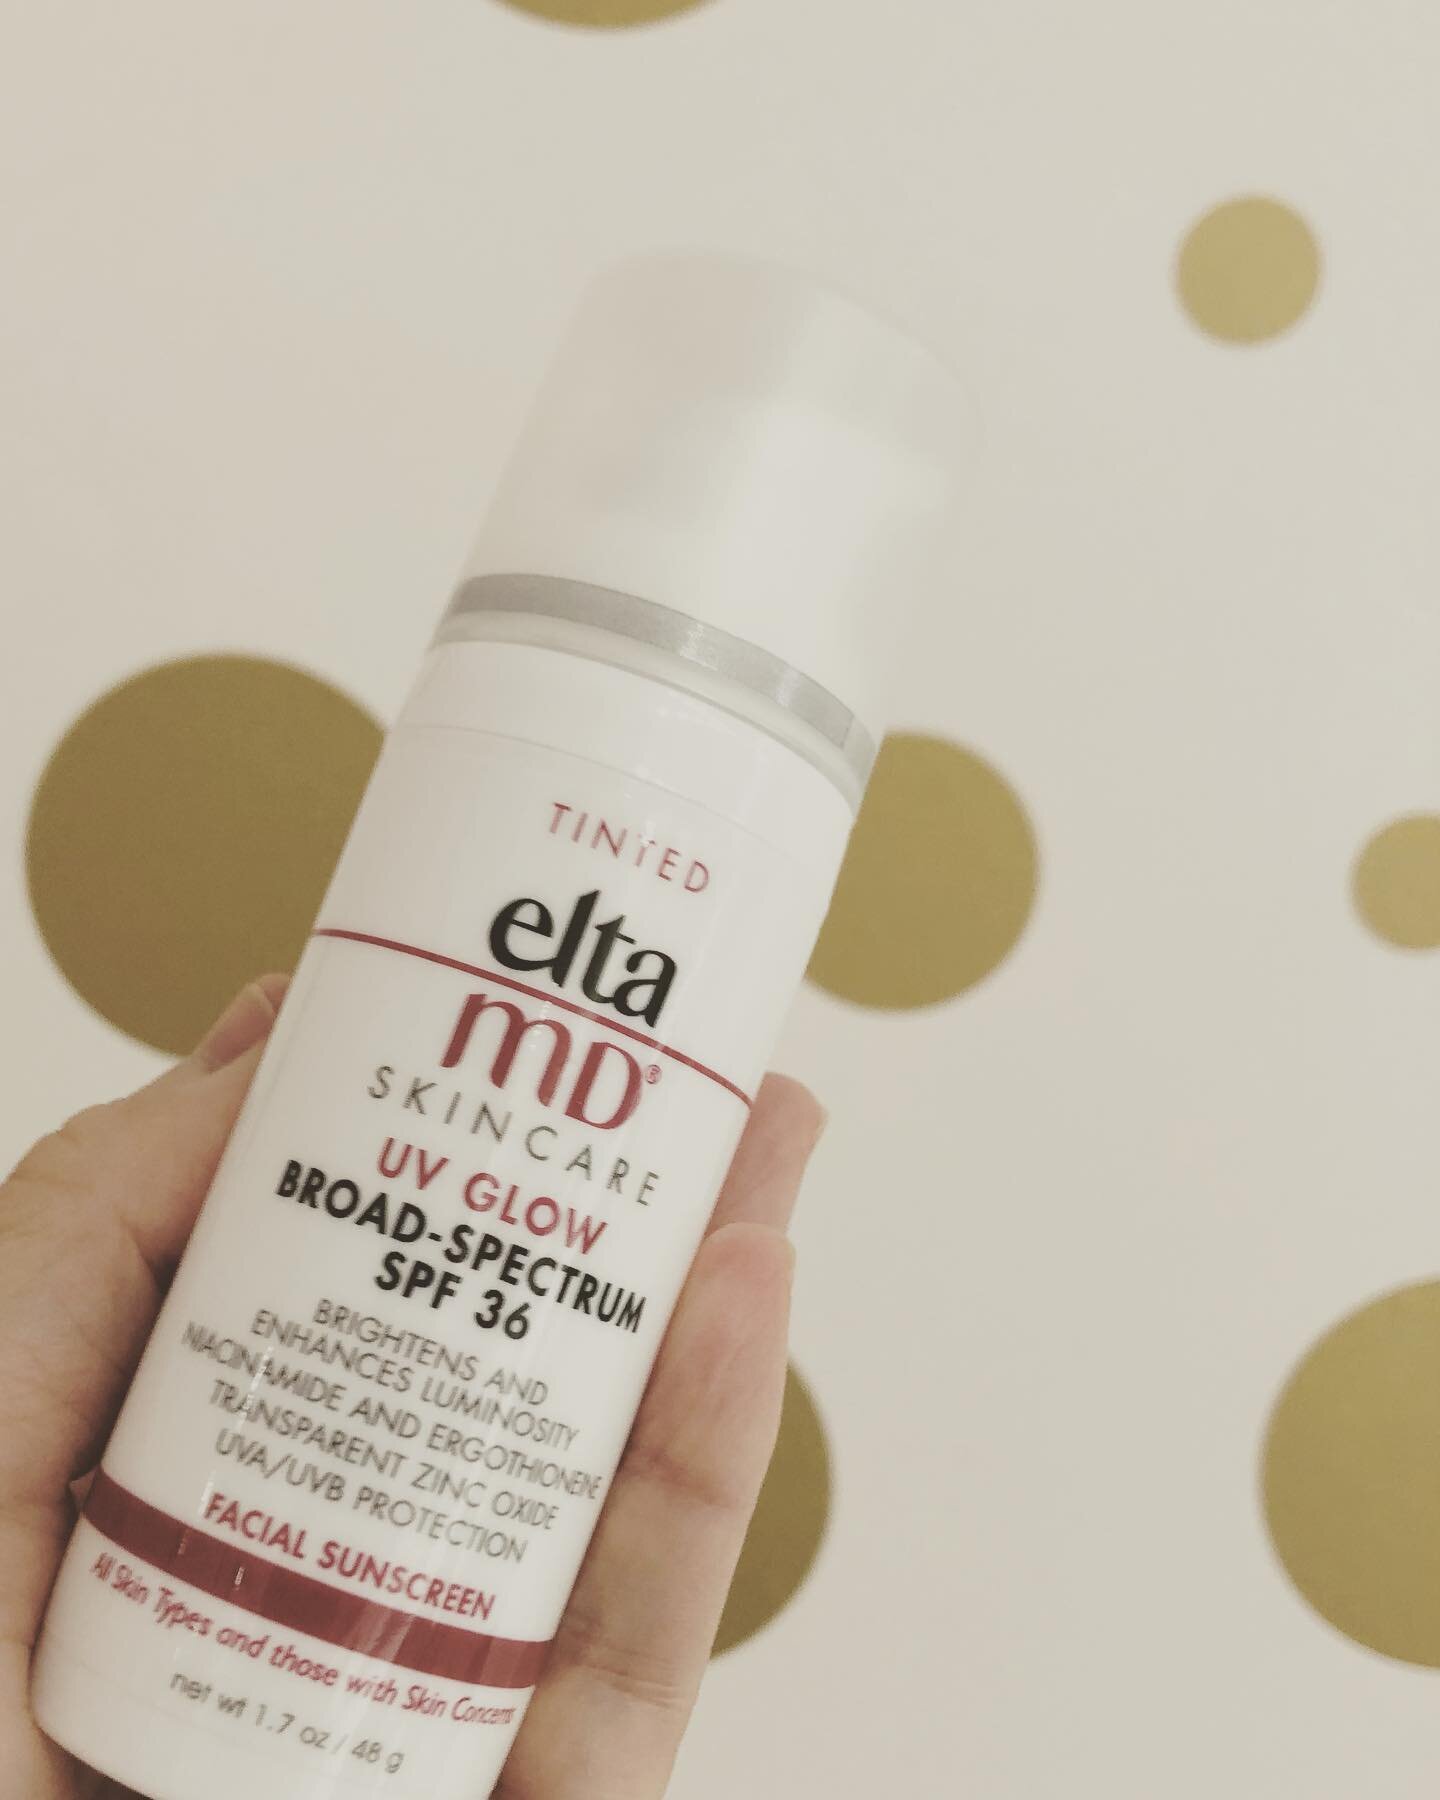 Don&rsquo;t leave home without it!! Glow and be protected with Elta MD!!
We&rsquo;re stocked!